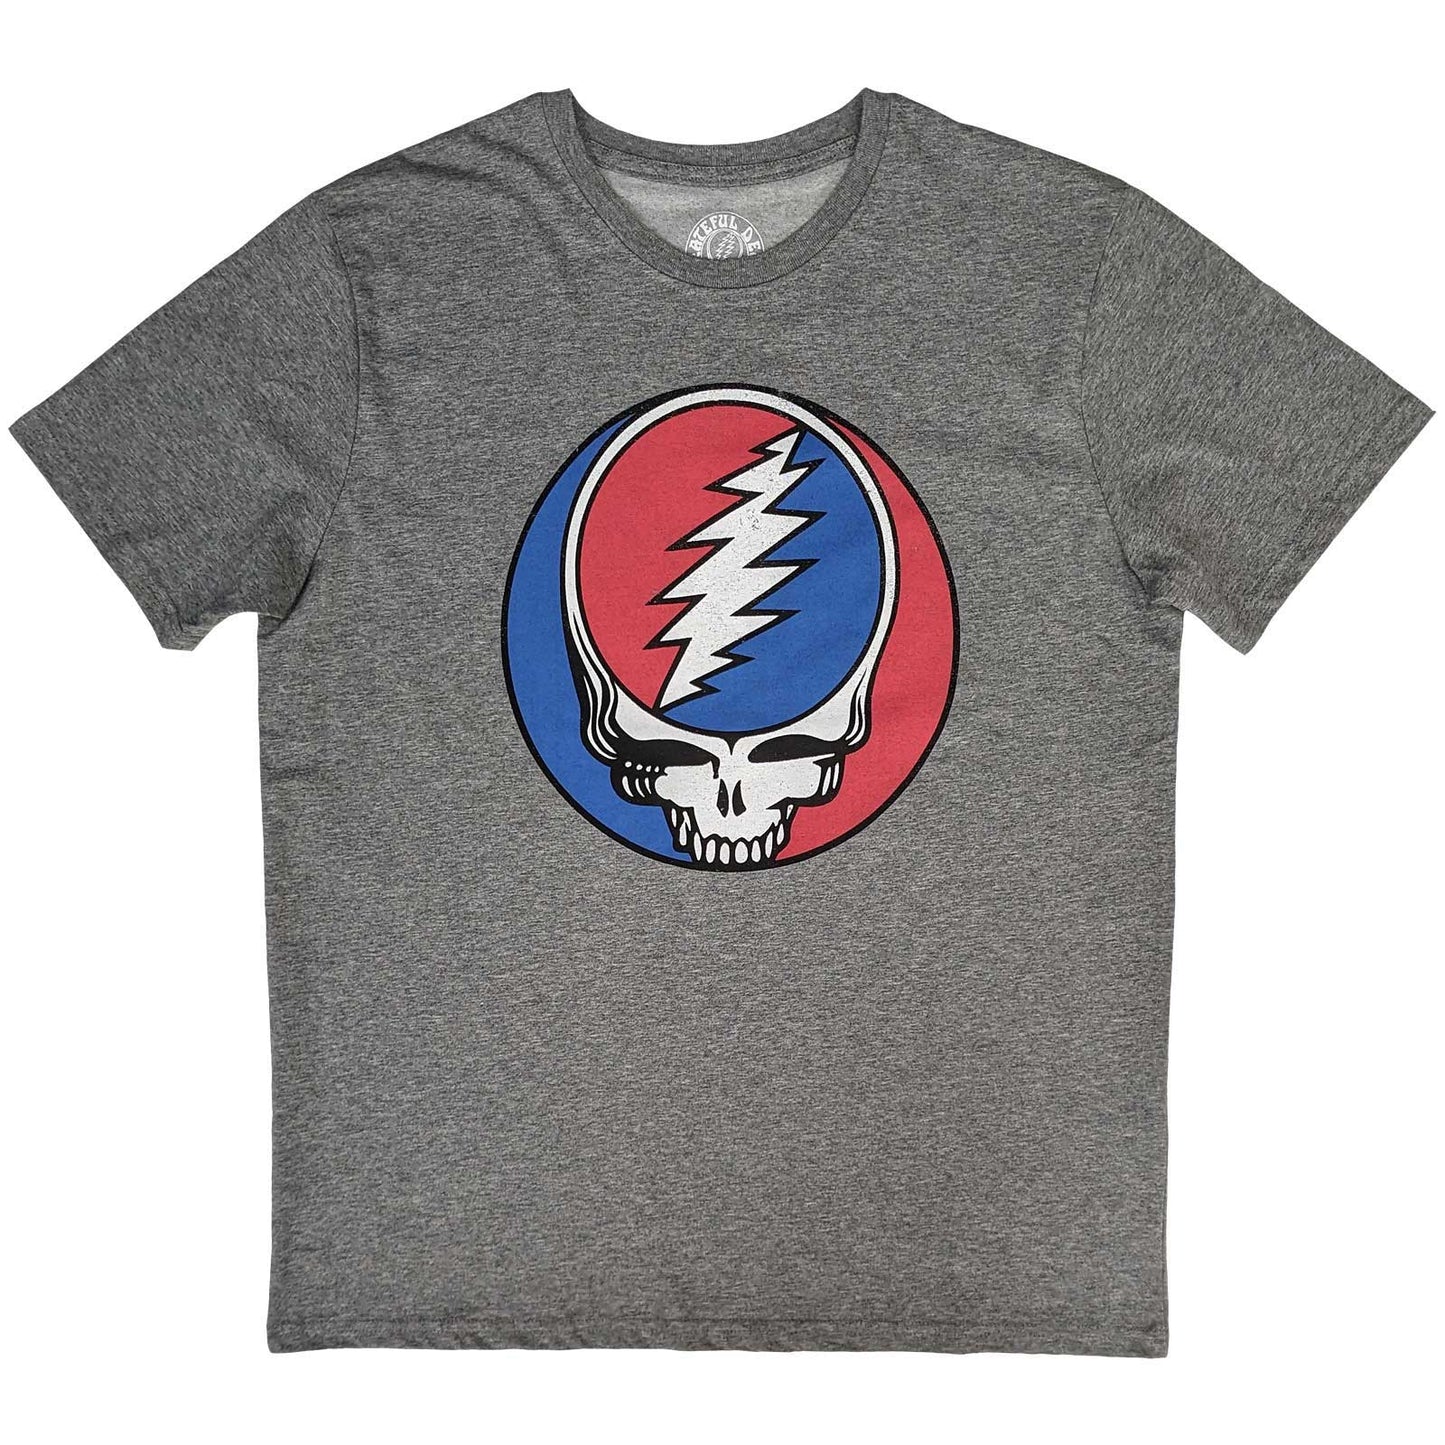 Grateful Dead T-Shirt: Steal Your Face Classic